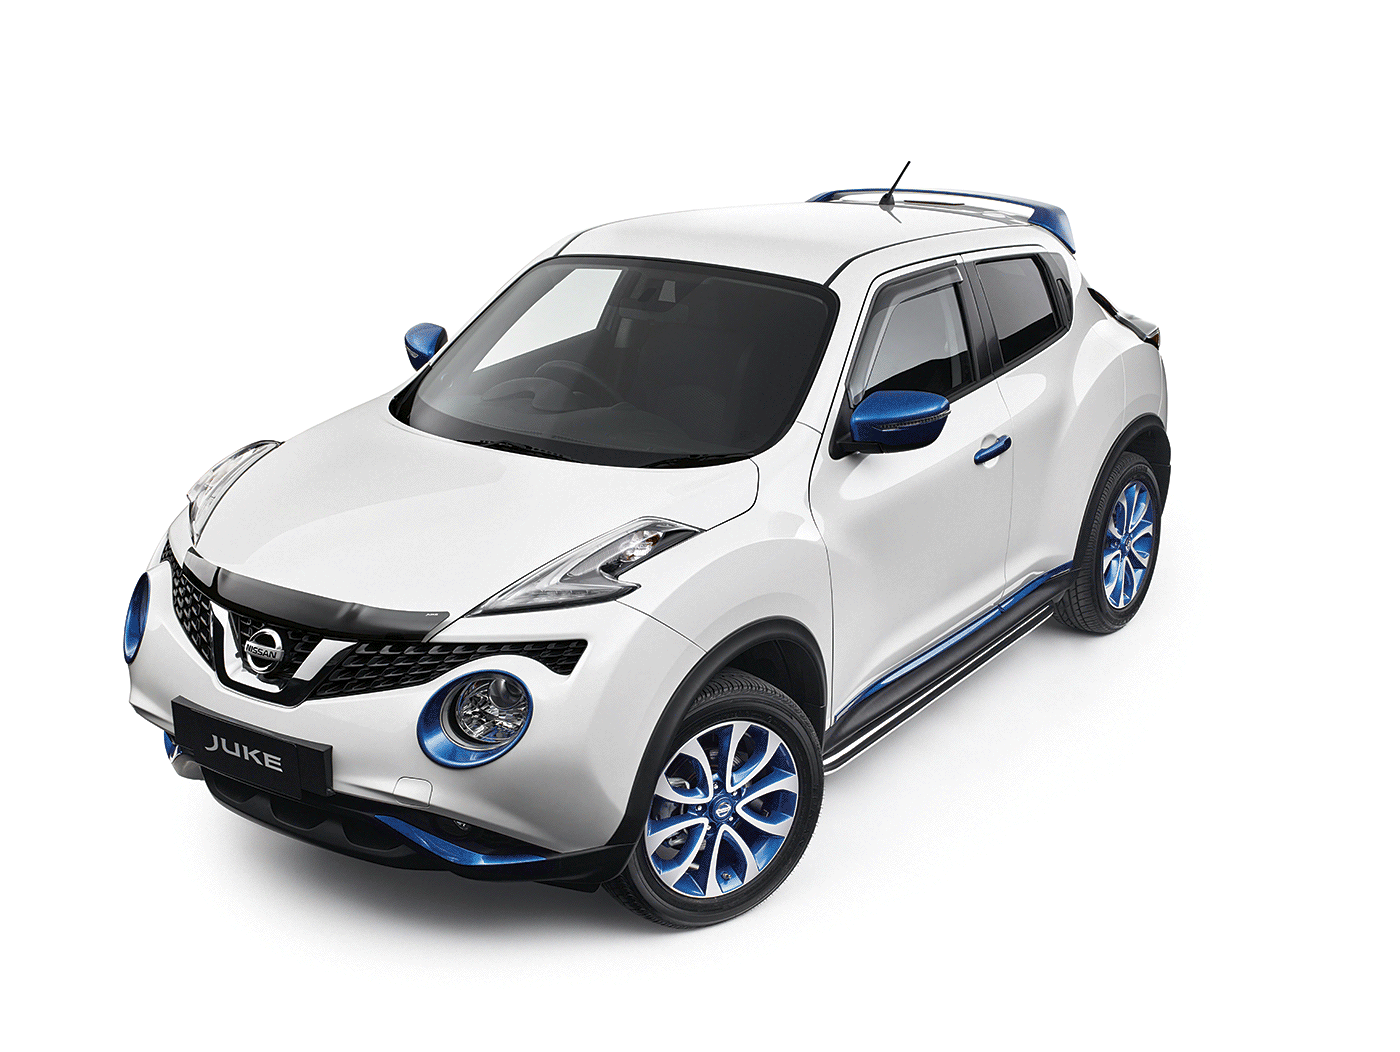 Animated GIF showing stages of retouching of Nissan Juke car from white to yellow.